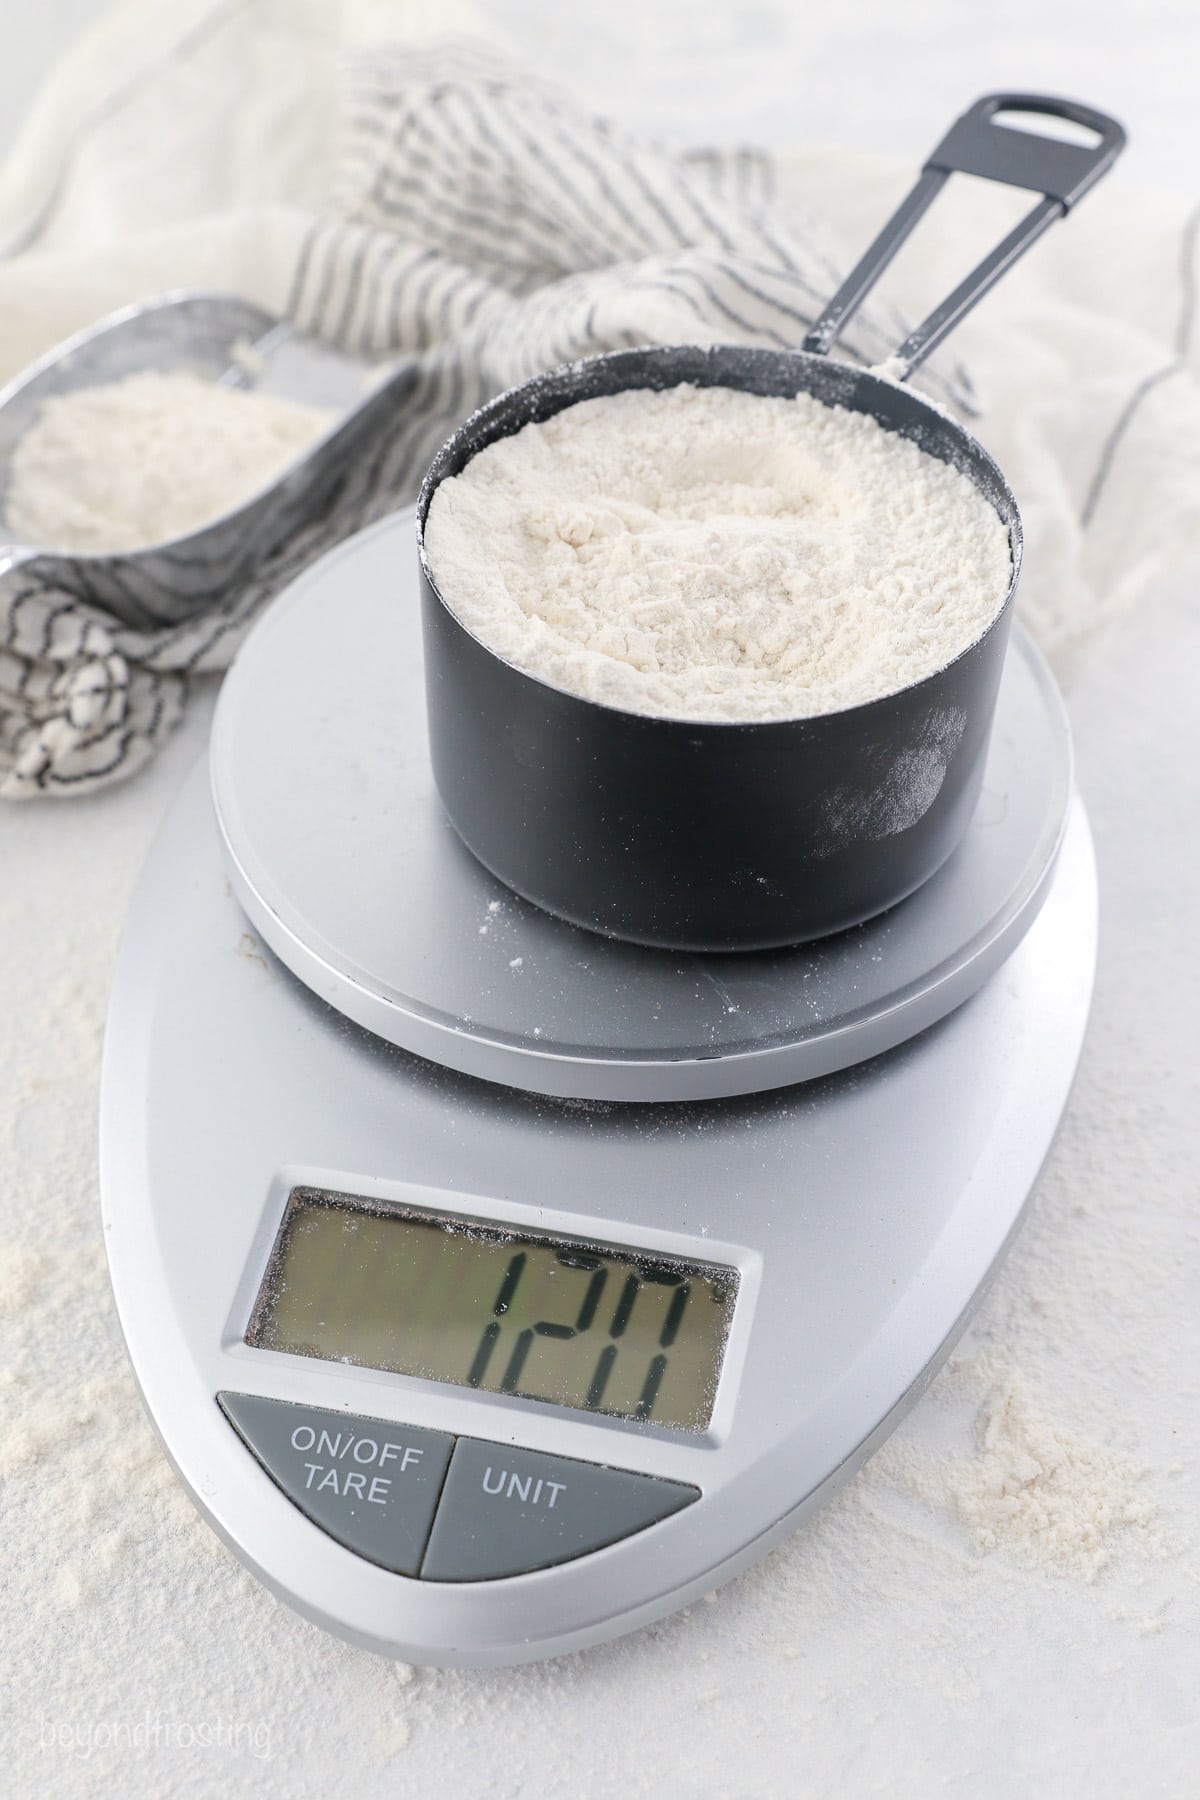 A measured cup of flour of a kitchen scale, showing 120g